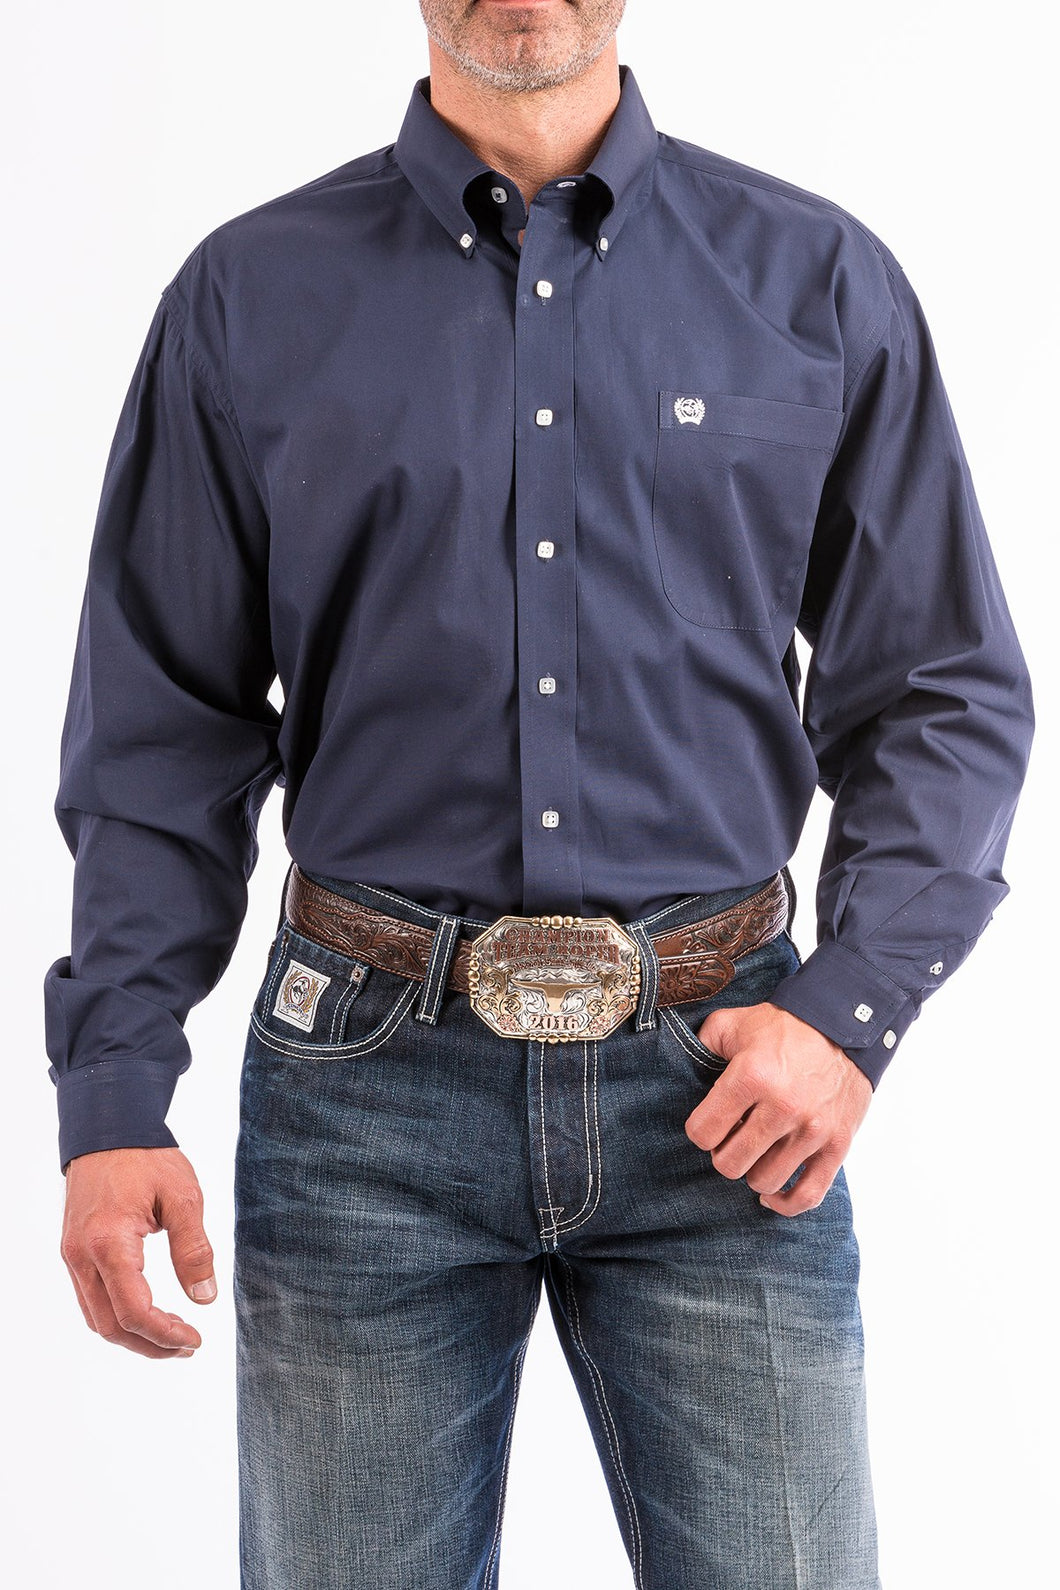 Pard's Western Shop Cinch Solid Navy Button-Down Shirt for Men